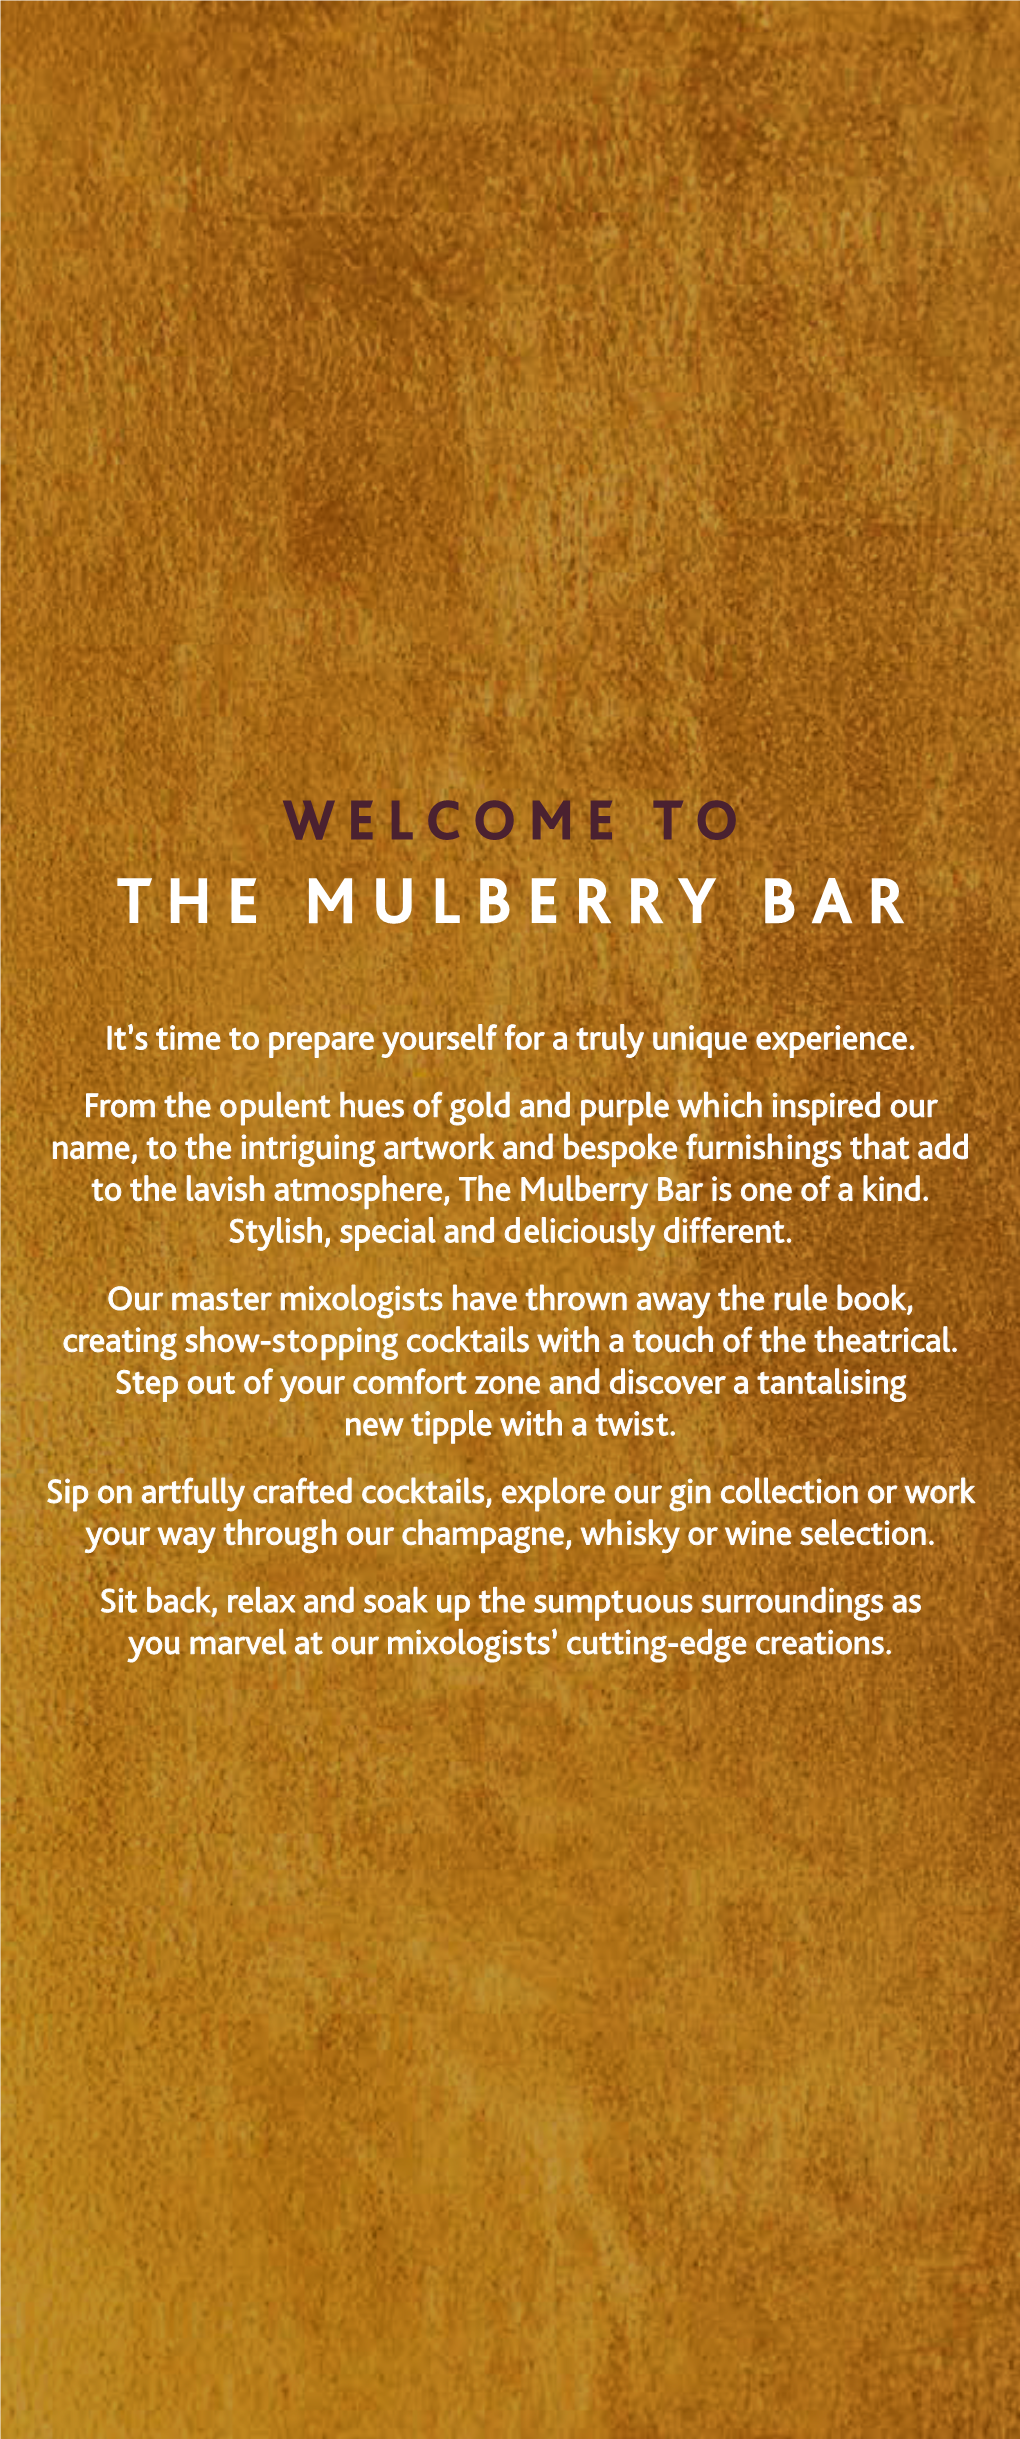 The Mulberry Bar